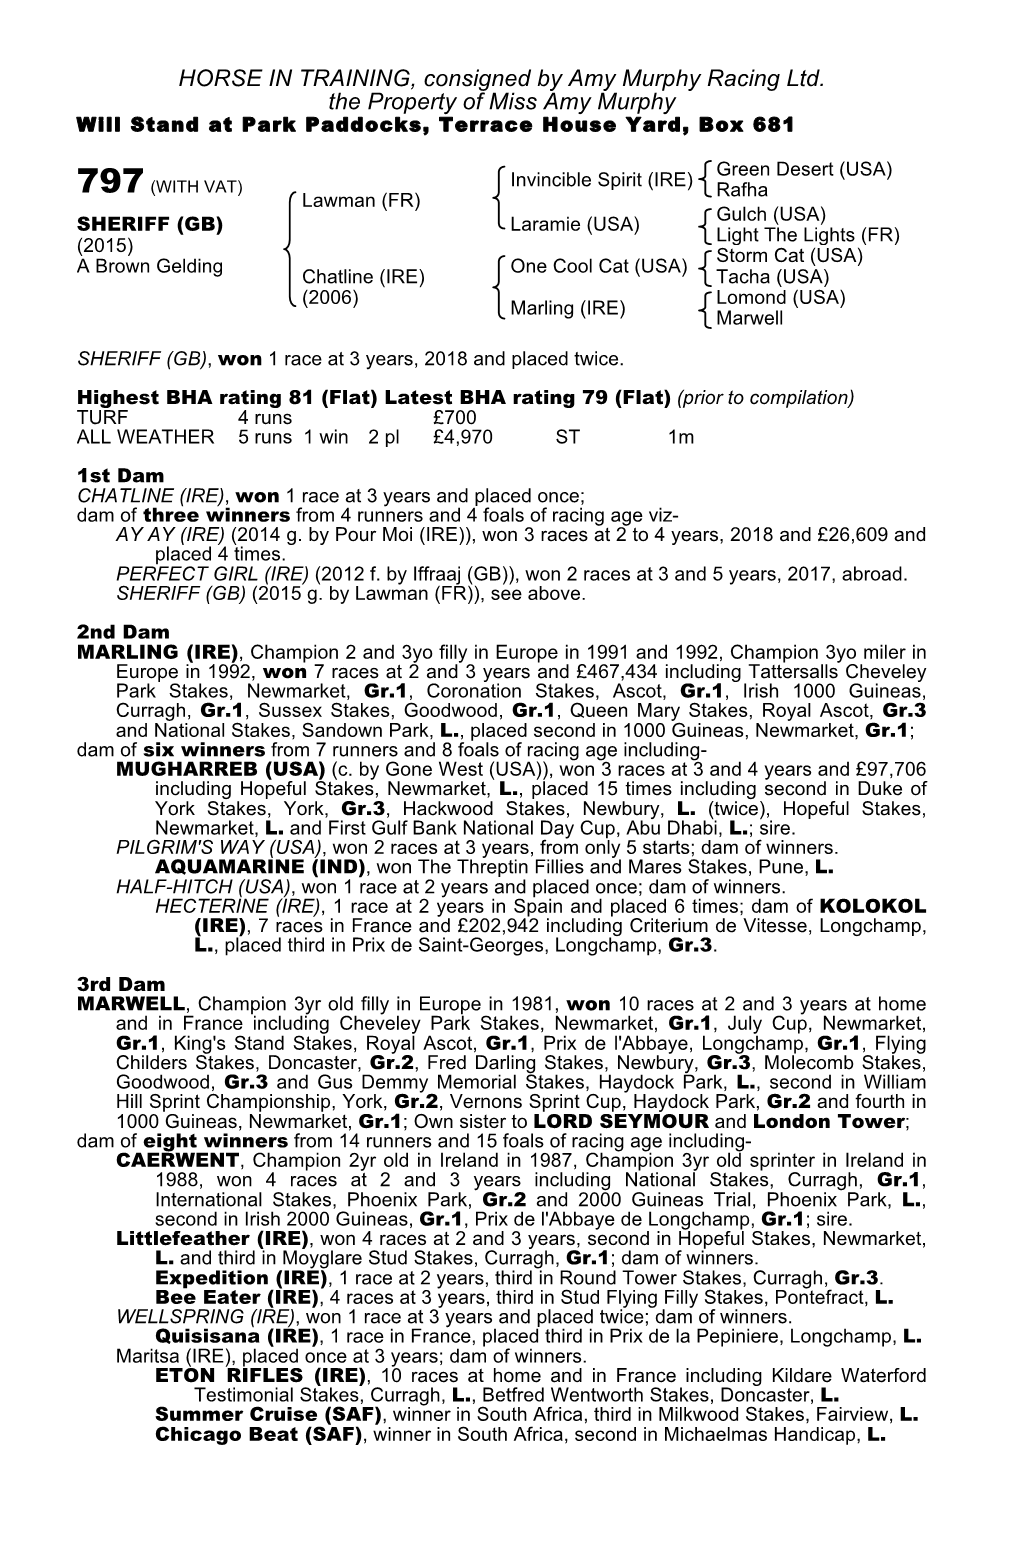 HORSE in TRAINING, Consigned by Amy Murphy Racing Ltd. the Property of Miss Amy Murphy Will Stand at Park Paddocks, Terrace House Yard, Box 681